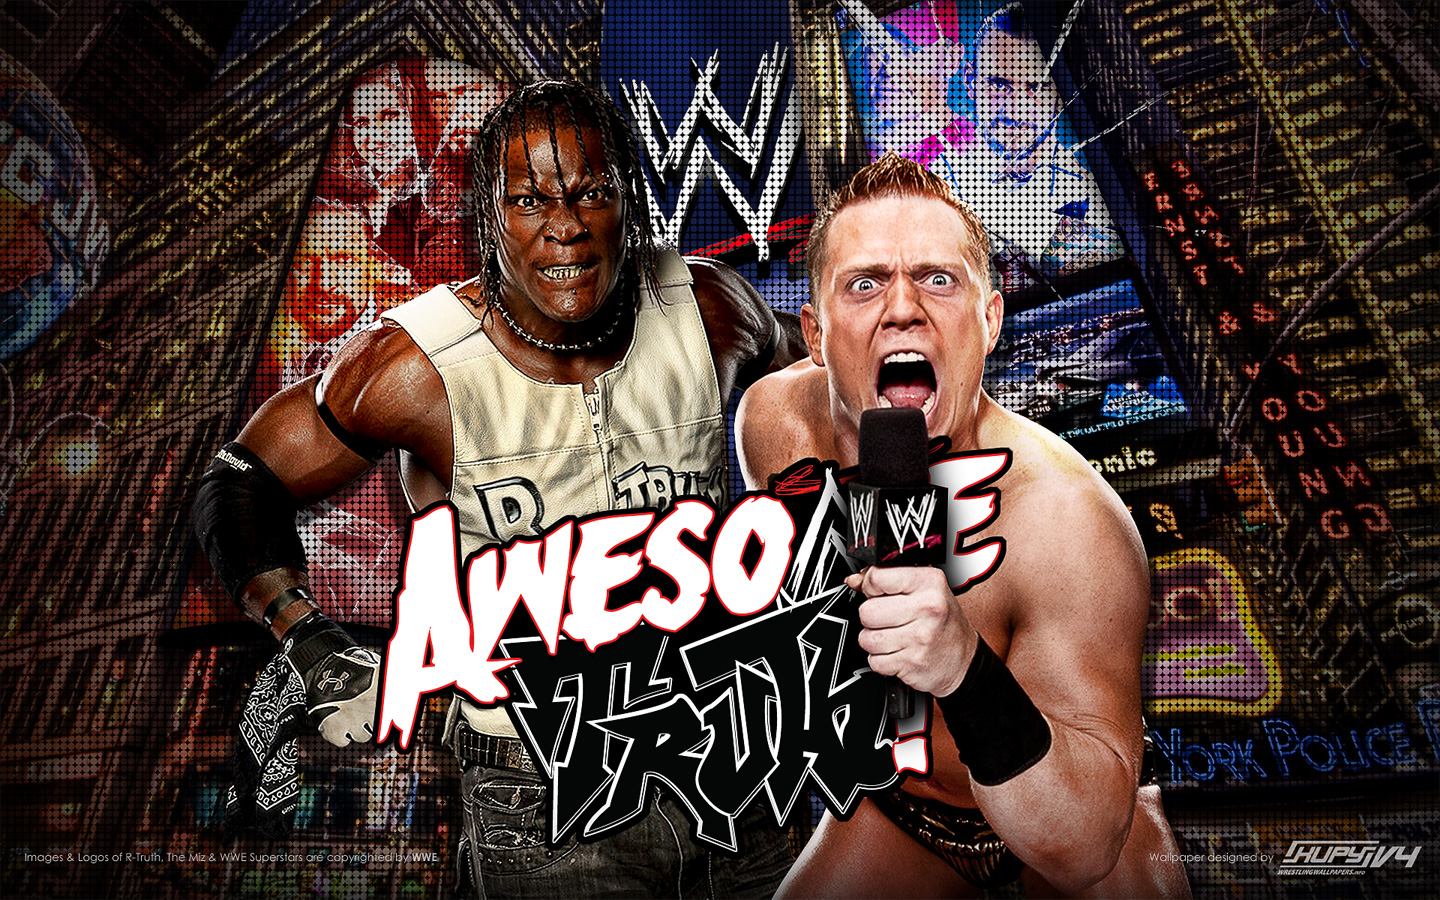 NEW Awesome Truth wallpaper! - Kupy Wrestling Wallpapers